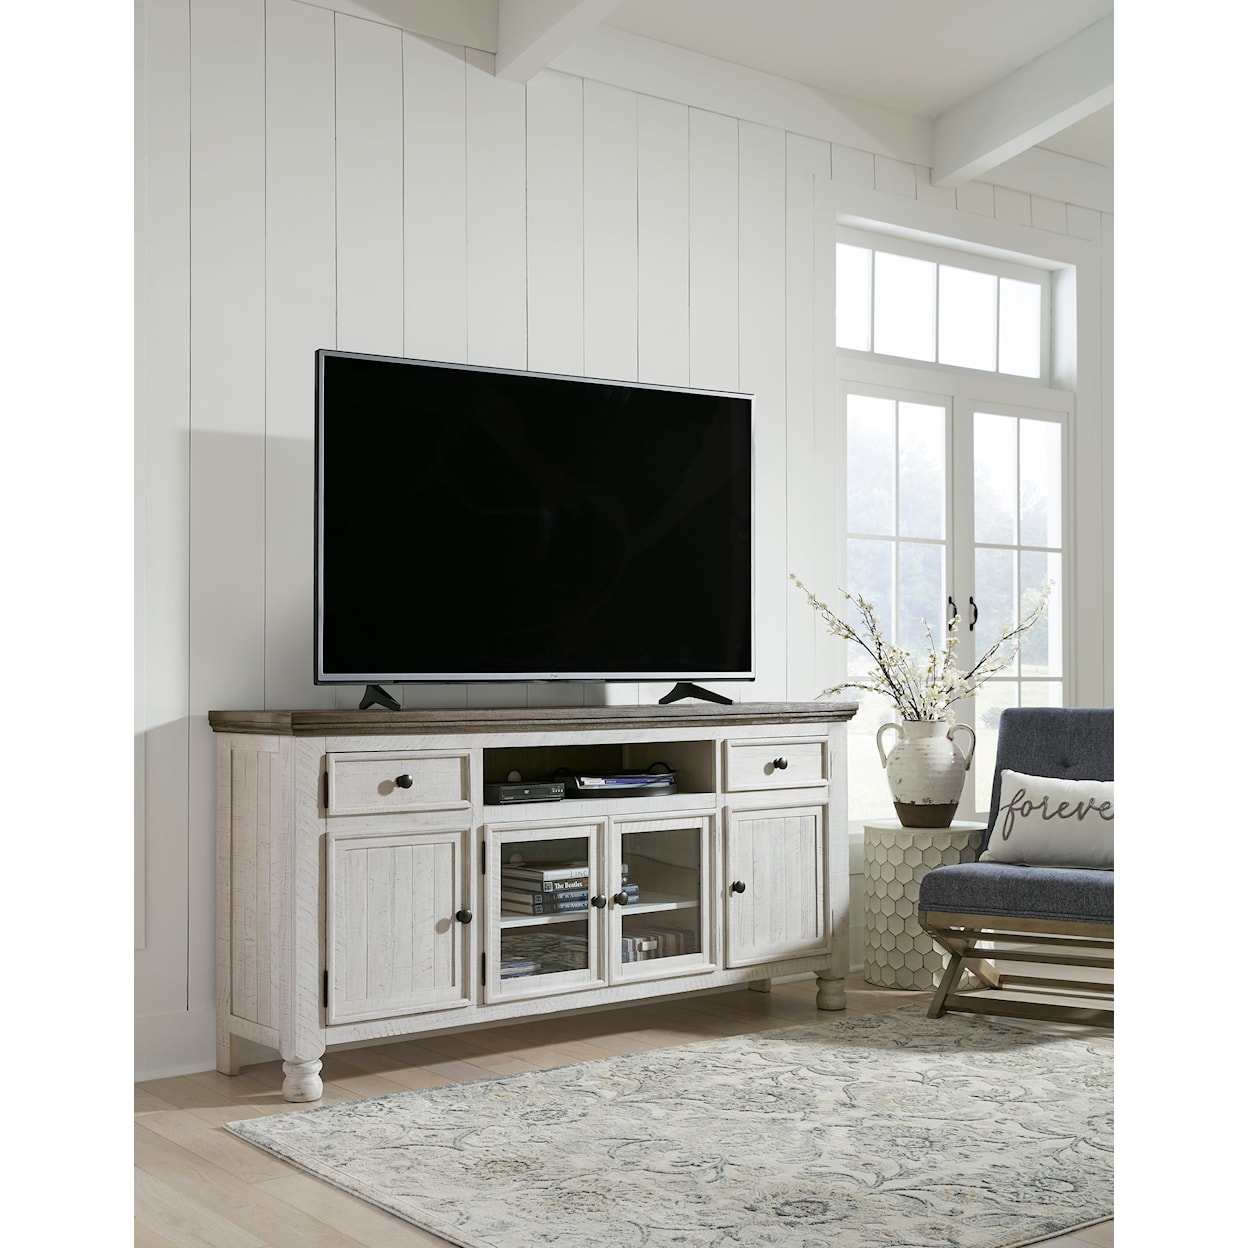 Signature Design by Ashley Havalance TV Stand